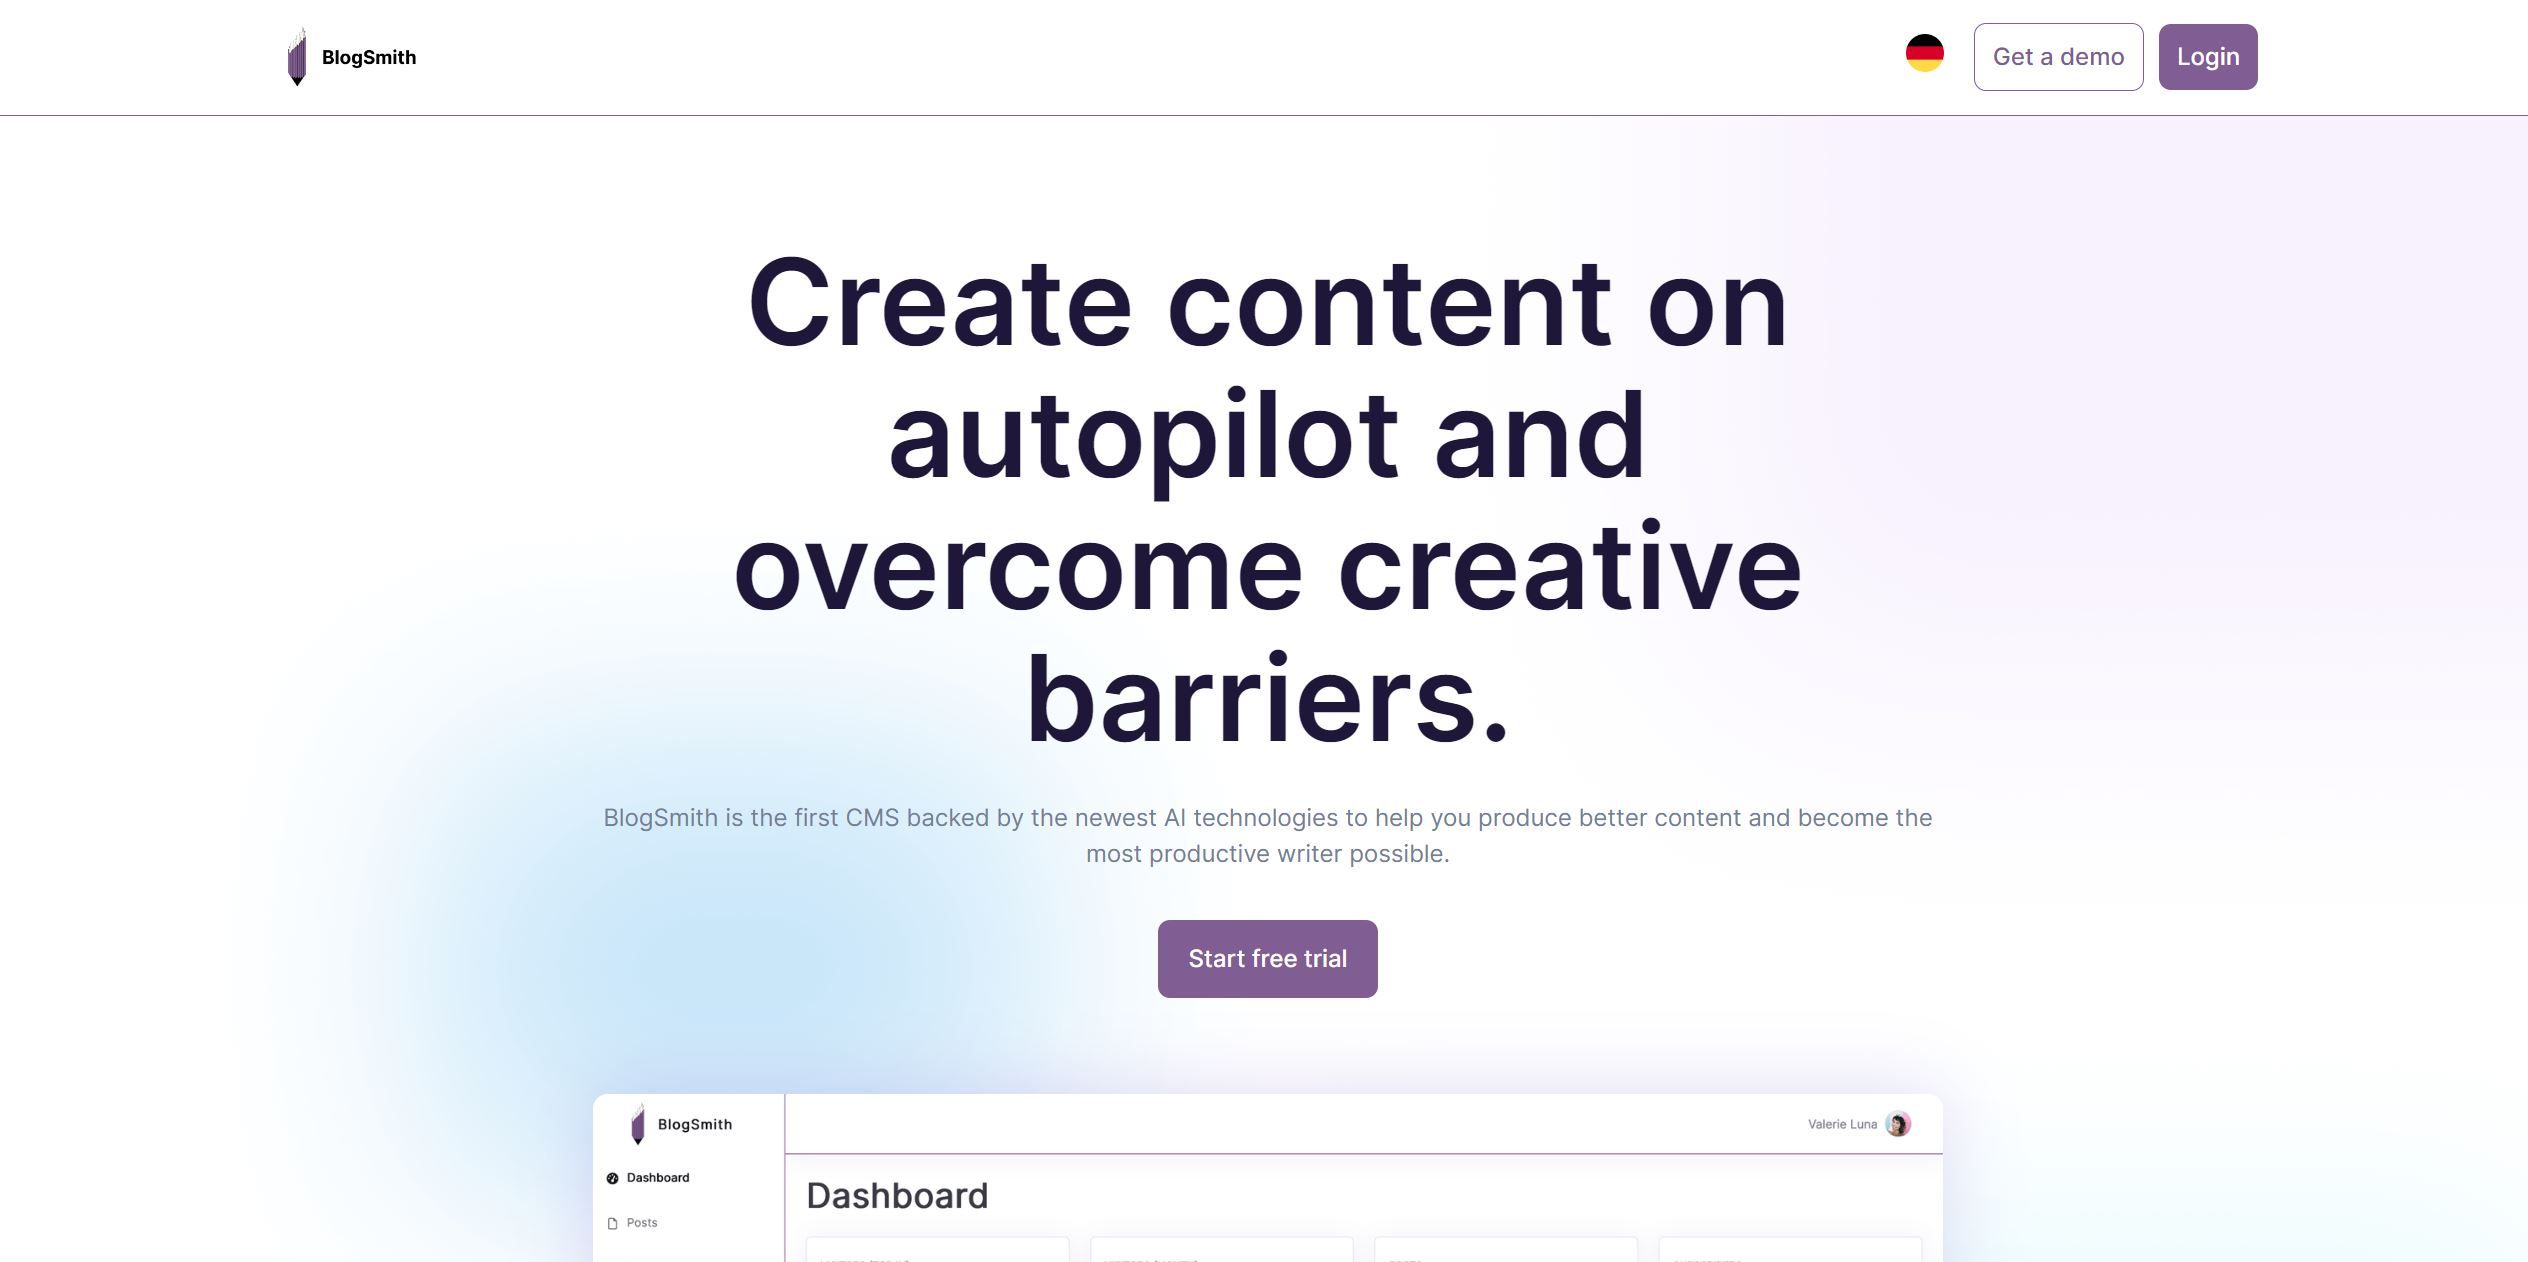  Cloud-based CMS for content creation and